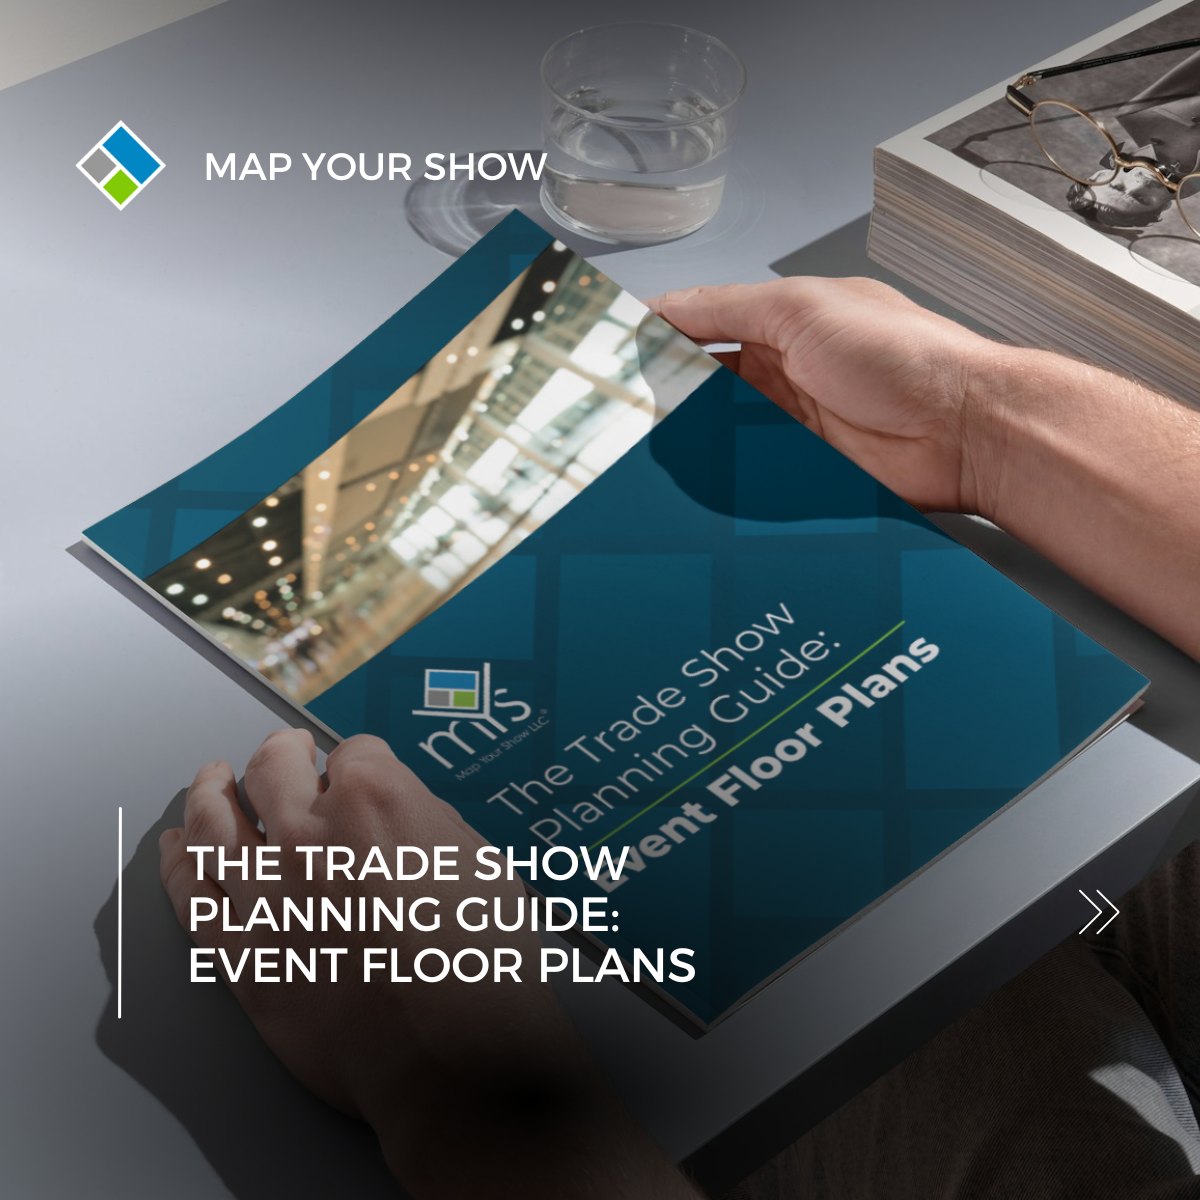 The Trade Show Planning Guide: Event Floor Plans - FREE Download!